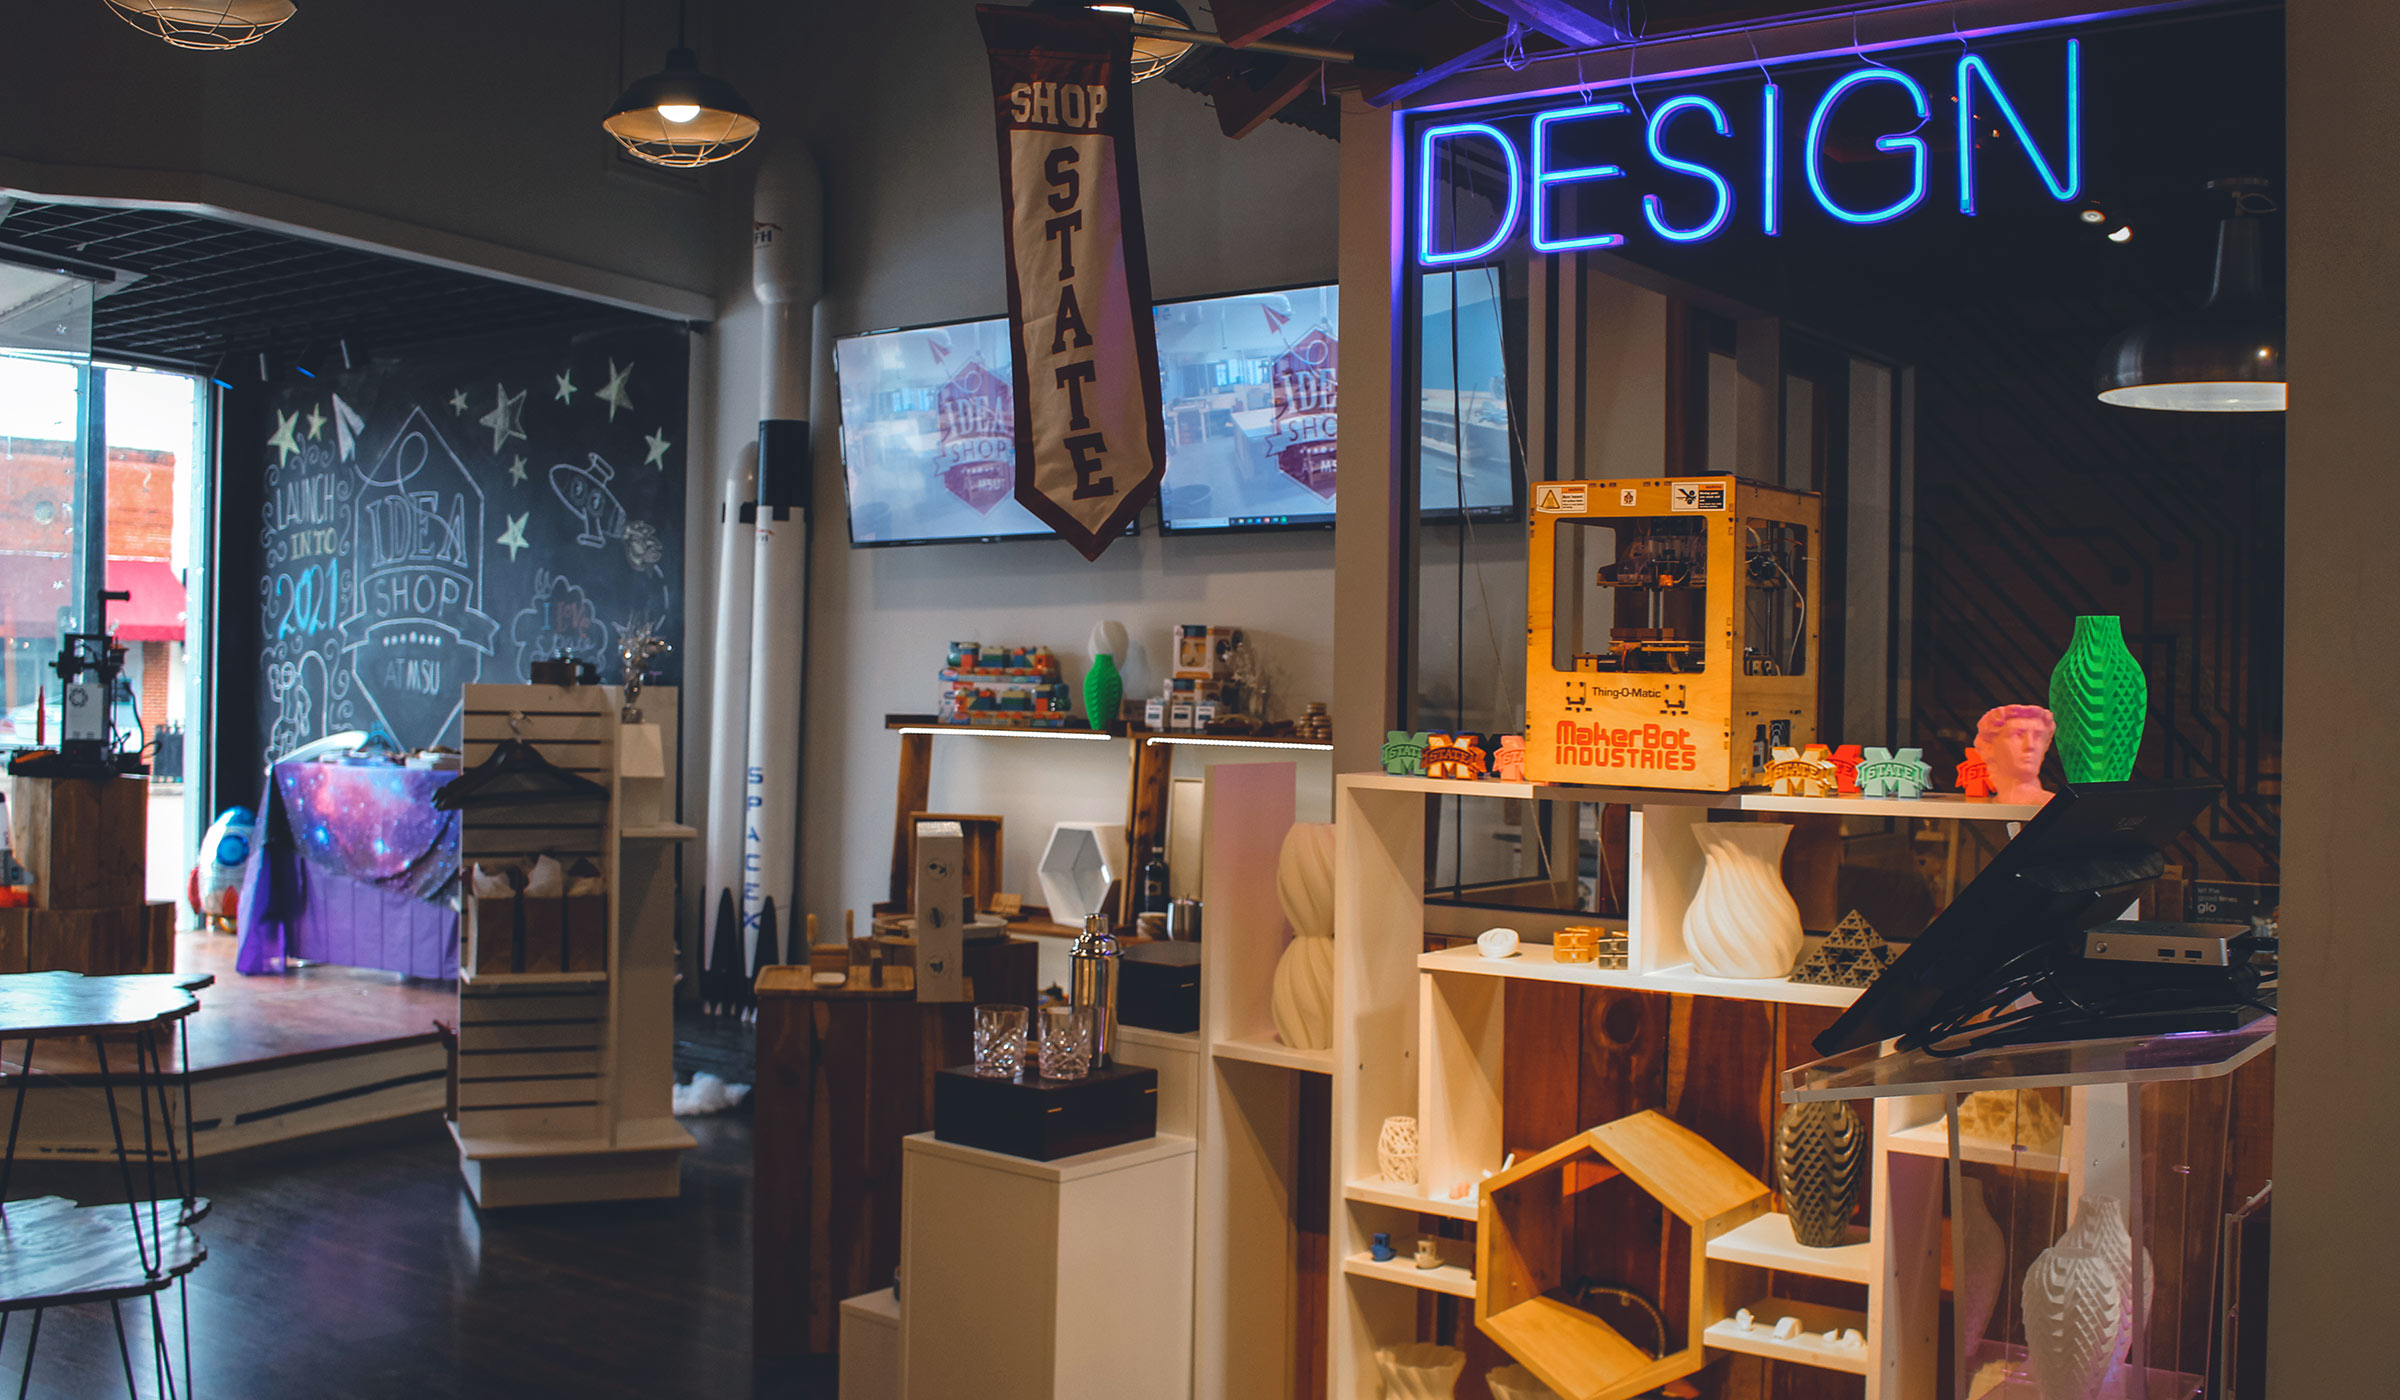 Room with neon design sign and STEM oriented projects and 3D printed objects on shelves